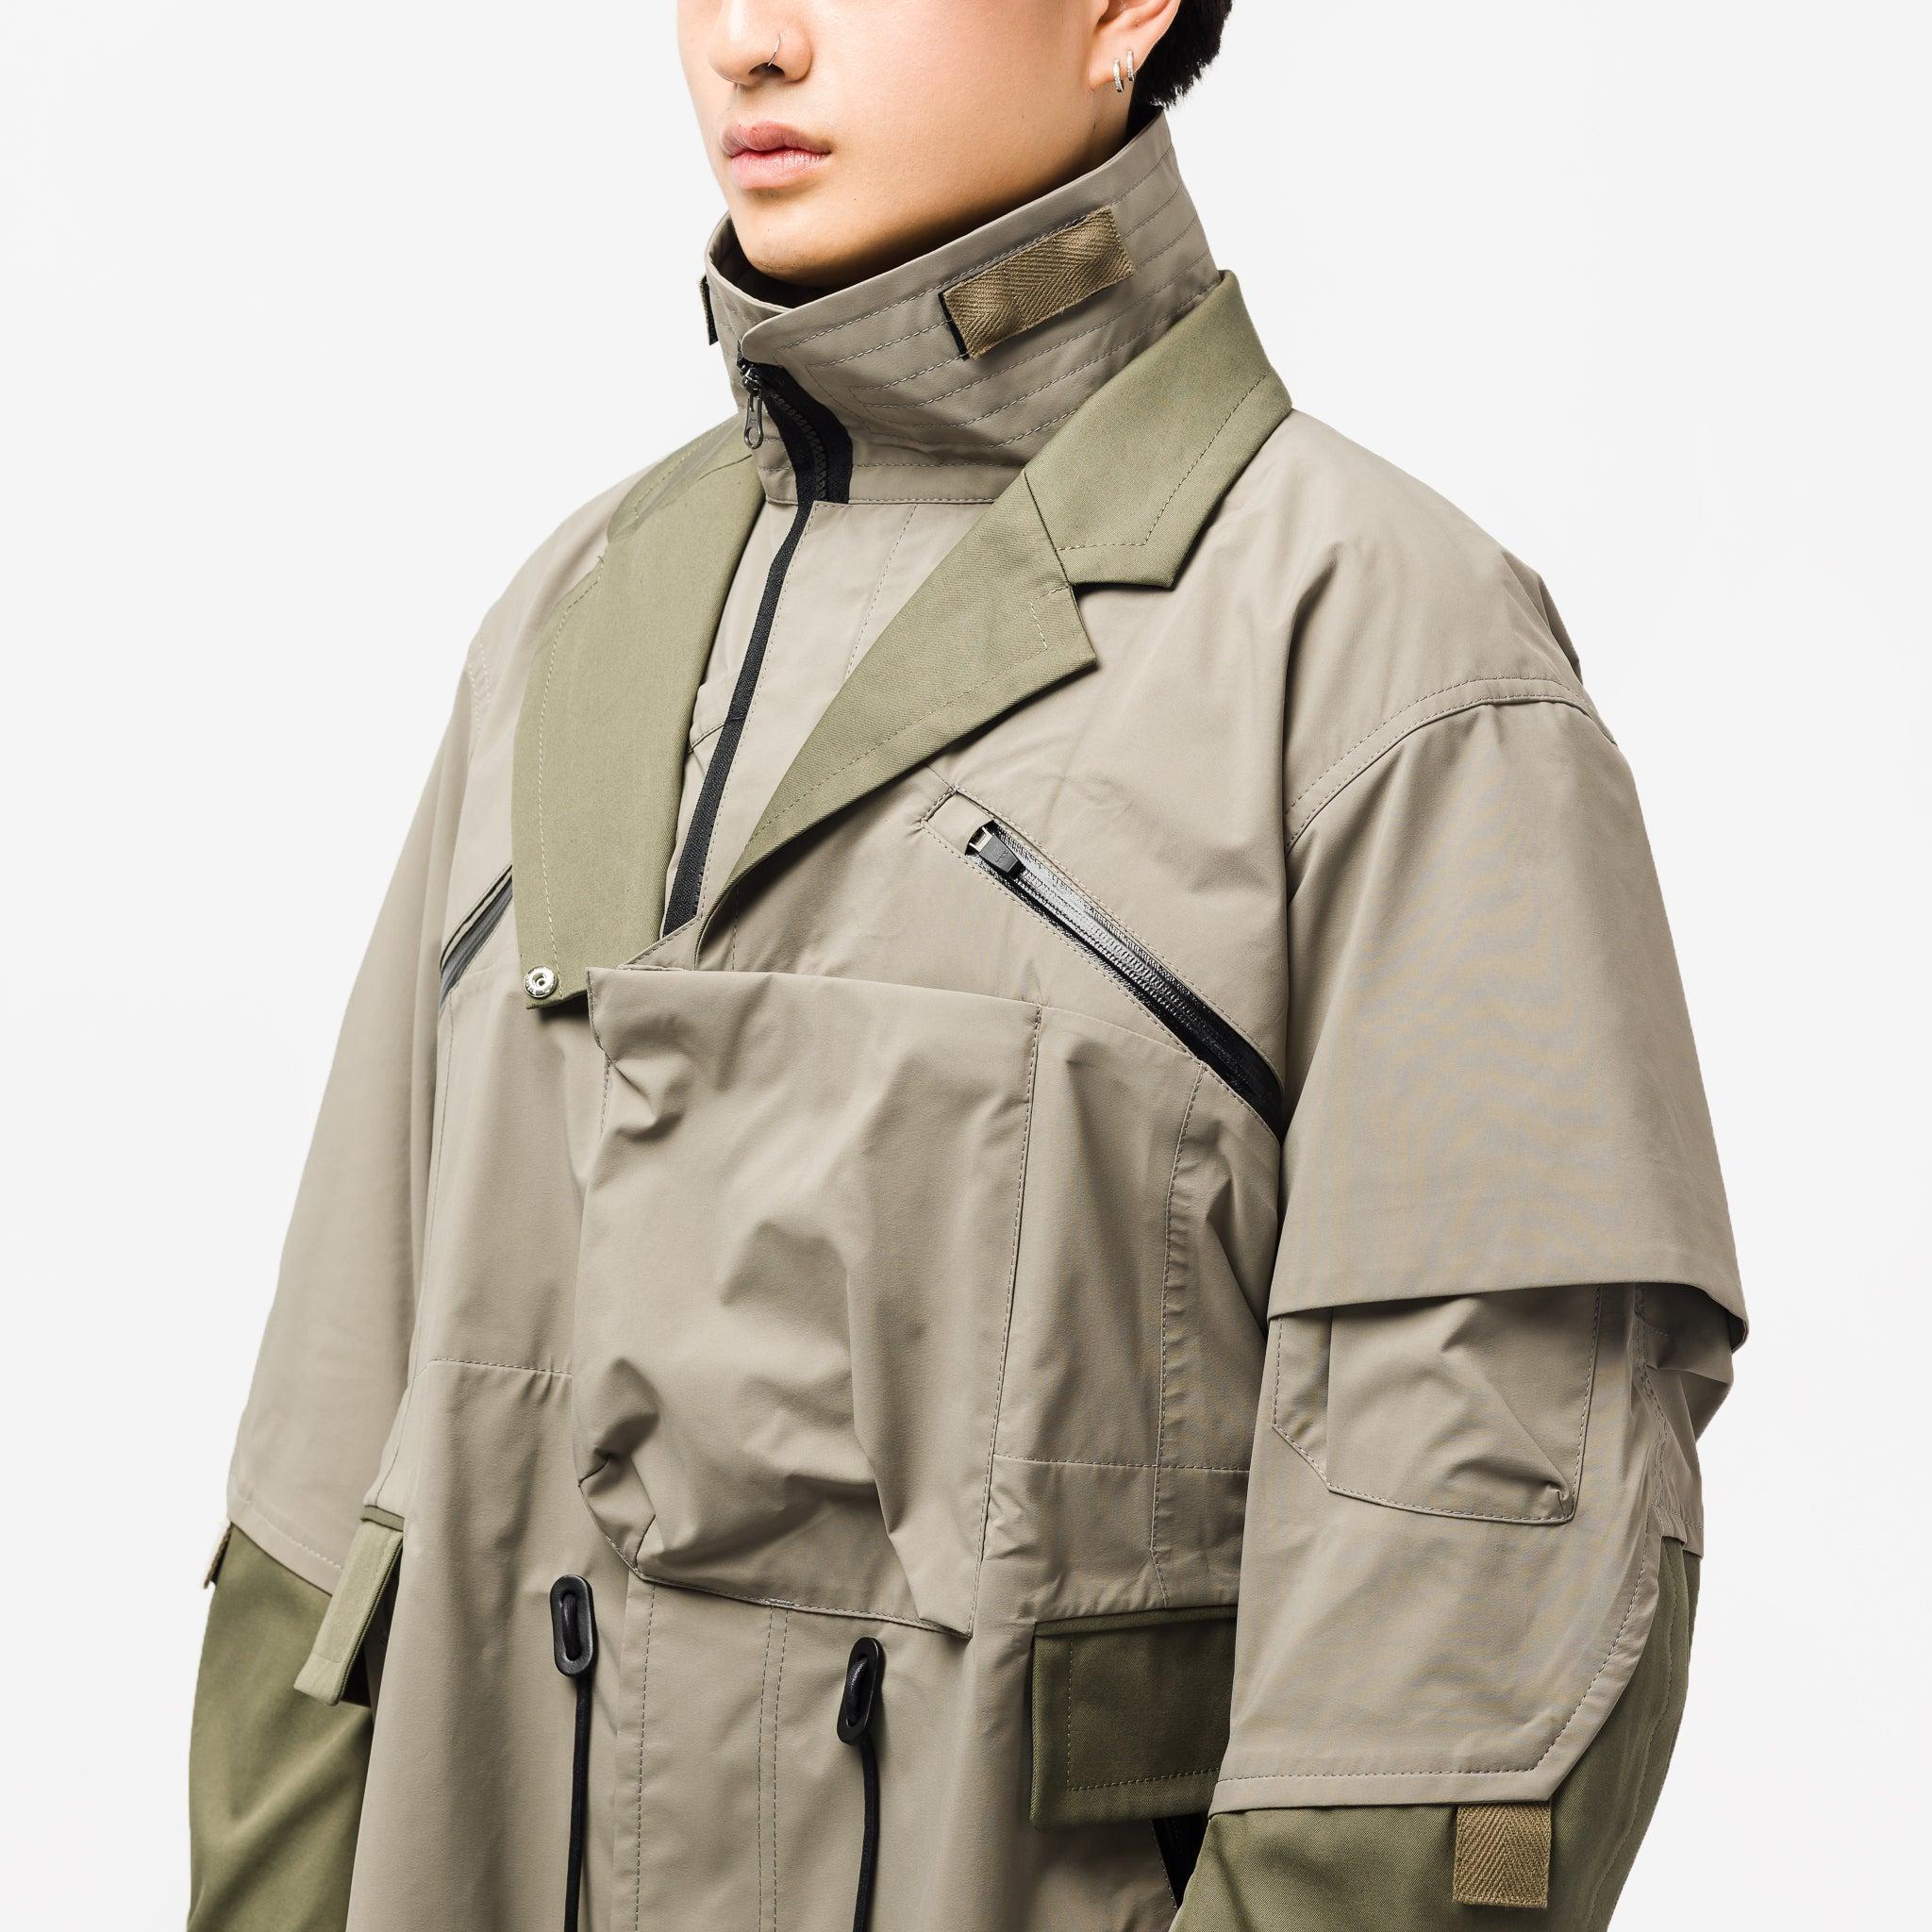 Sacai Acronym Coat in Natural for Men | Lyst